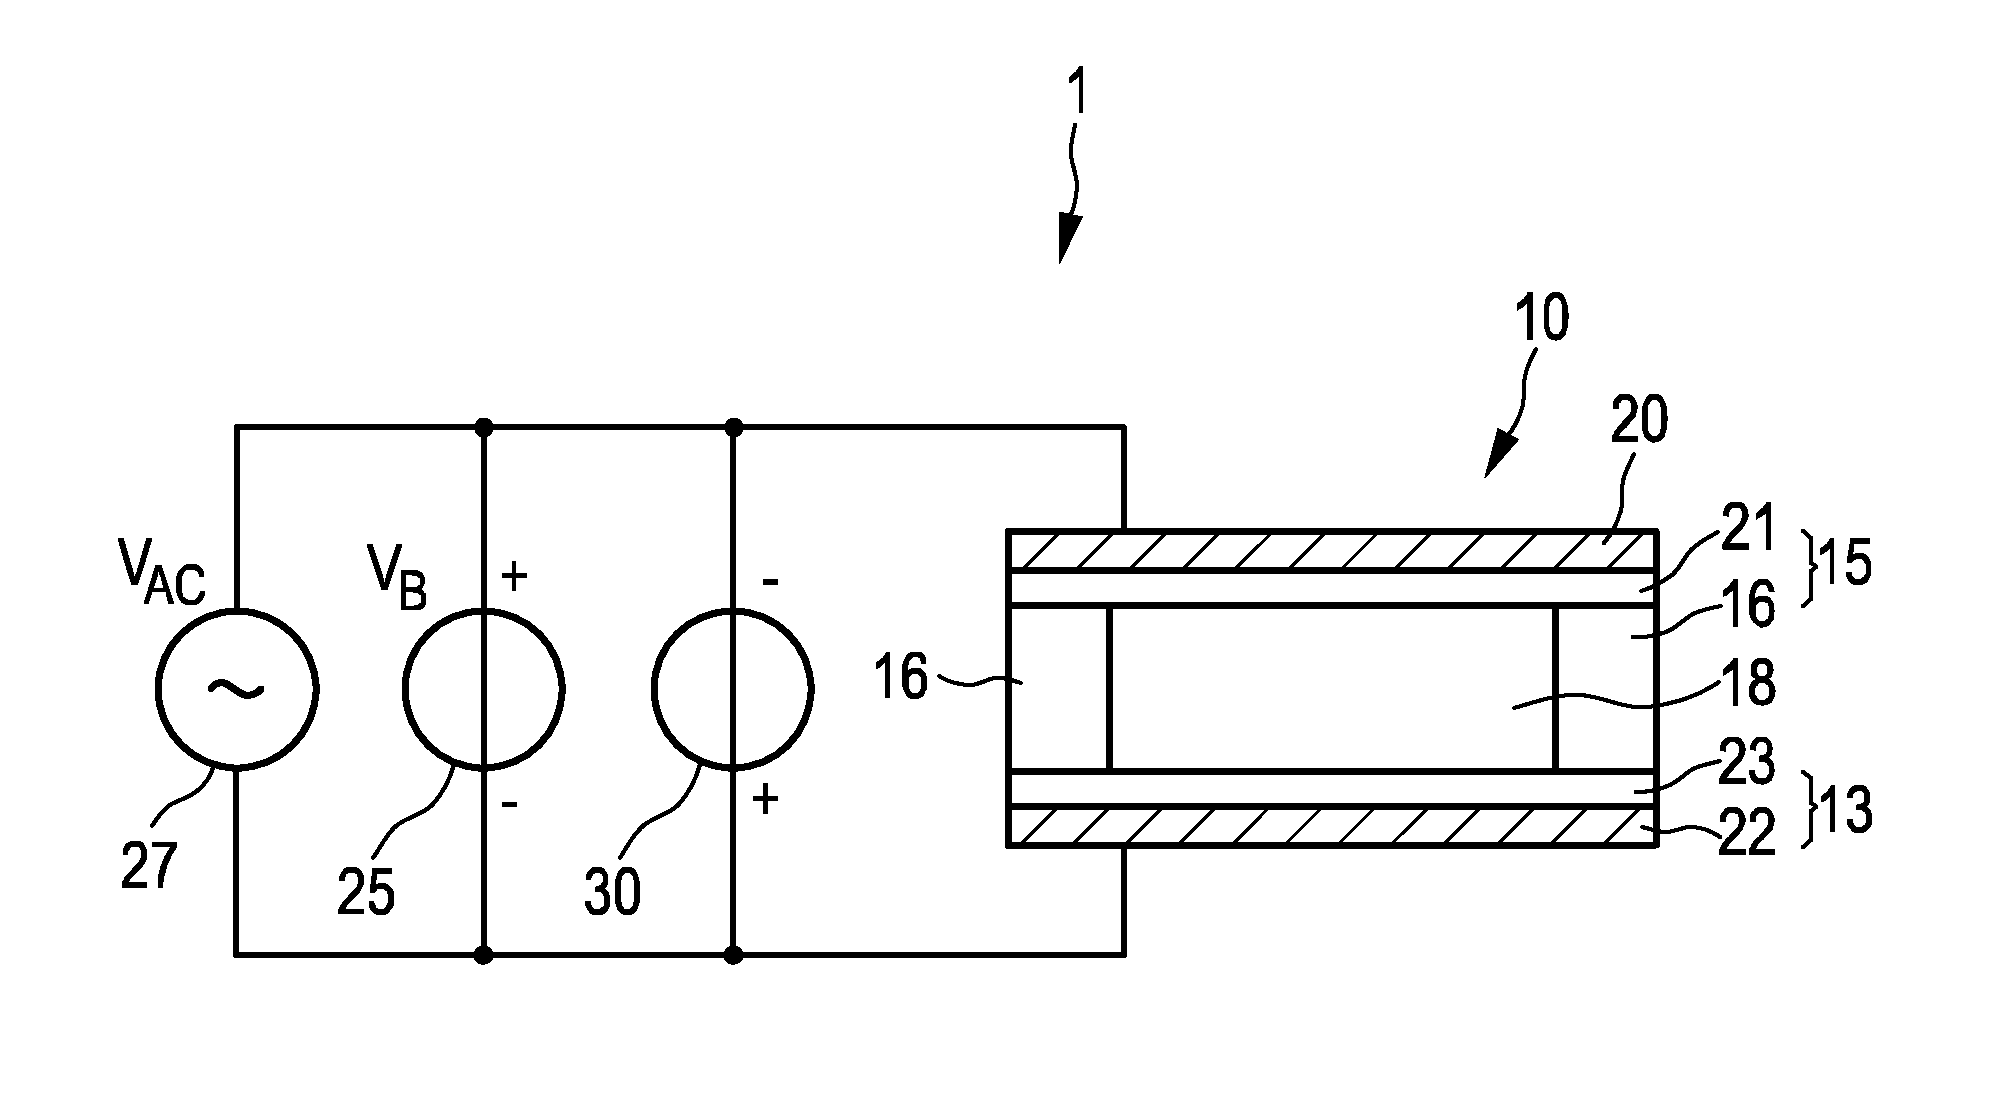 Capacitive micro-machined ultrasound transducer device with charging voltage source